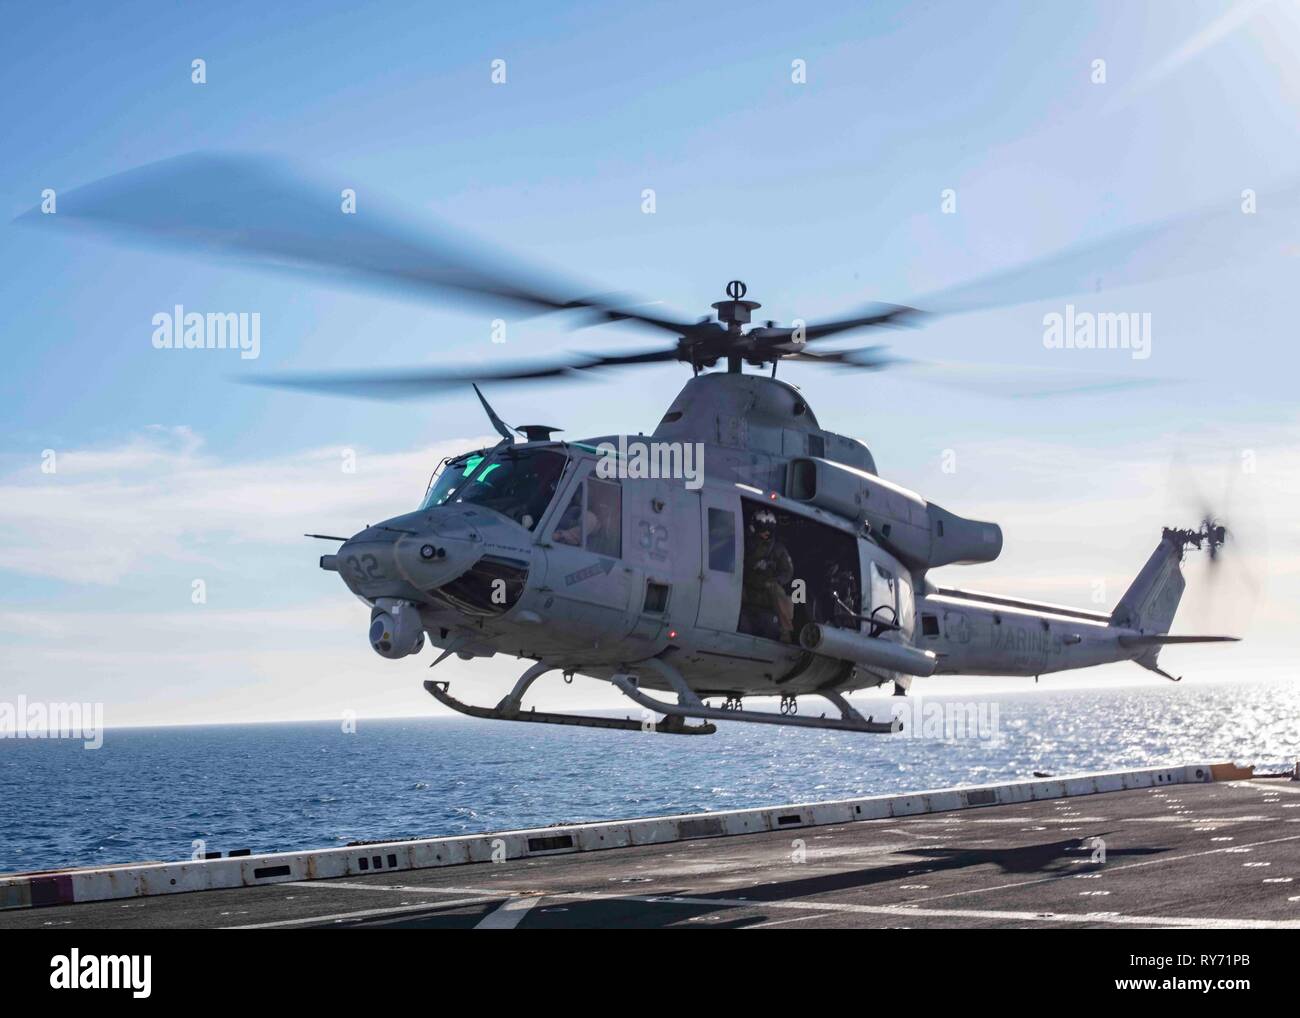 190308-N-HG389-0169 MEDITERRANEAN SEA (Mar. 8, 2019) A UH-1Y Huey helicopter assigned to the “Black Knights” of Marine Medium Tiltrotor Squadron (VMM) 264 (Reinforced) departs the flight deck of the San Antonio-class amphibious transport dock ship USS Arlington (LPD 24), Mar. 8, 2019. Arlington is on a scheduled deployment as part of the Kearsarge Amphibious Ready Group in support of maritime security operations, crisis response and theater security cooperation, while also providing a forward naval presence. (U.S. Navy photo by Mass Communication Specialist 2nd Class Brandon Parker/Released) Stock Photo